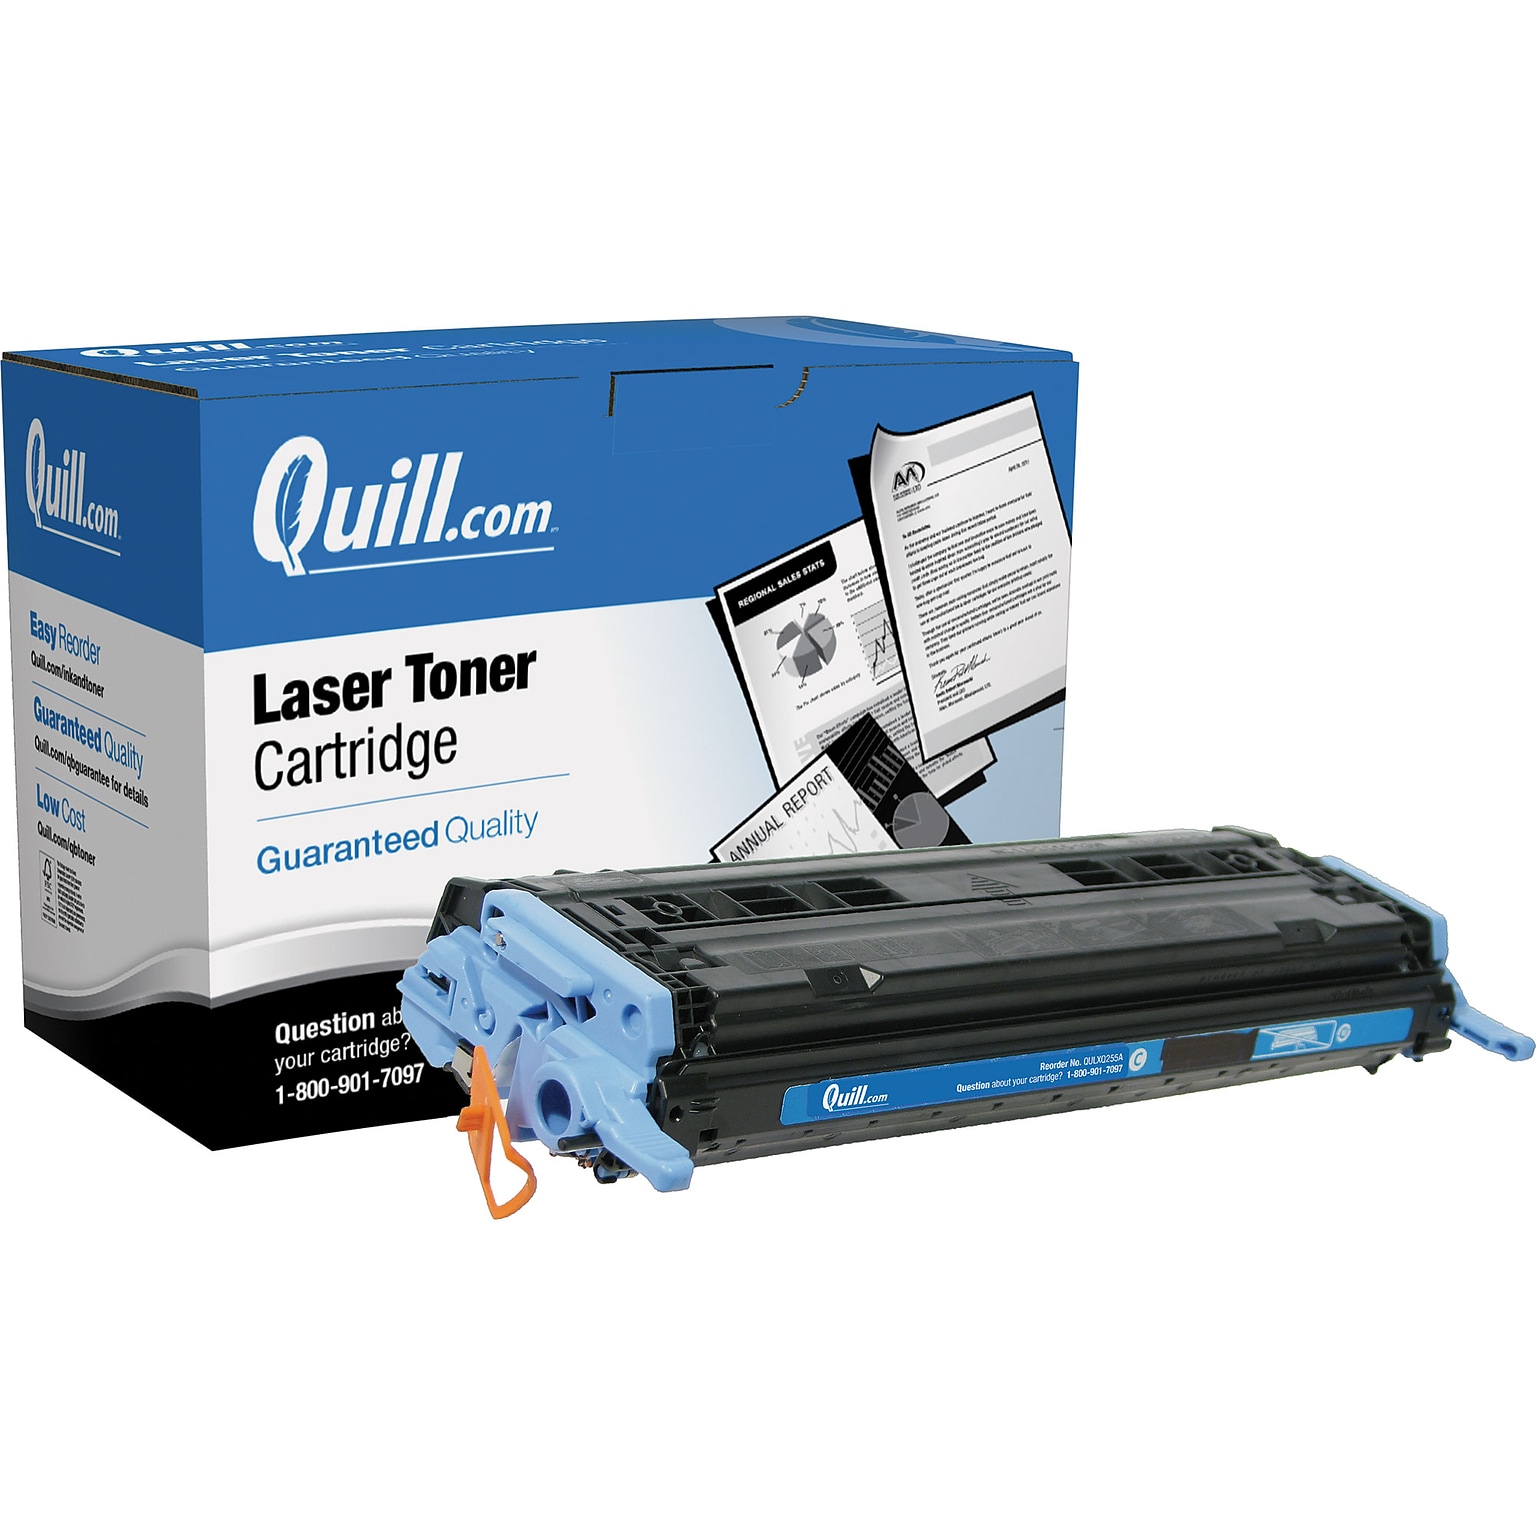 Quill Brand Remanufactured HP 124A (Q6001A) Cyan Laser Toner Cartridge (100% Satisfaction Guaranteed)